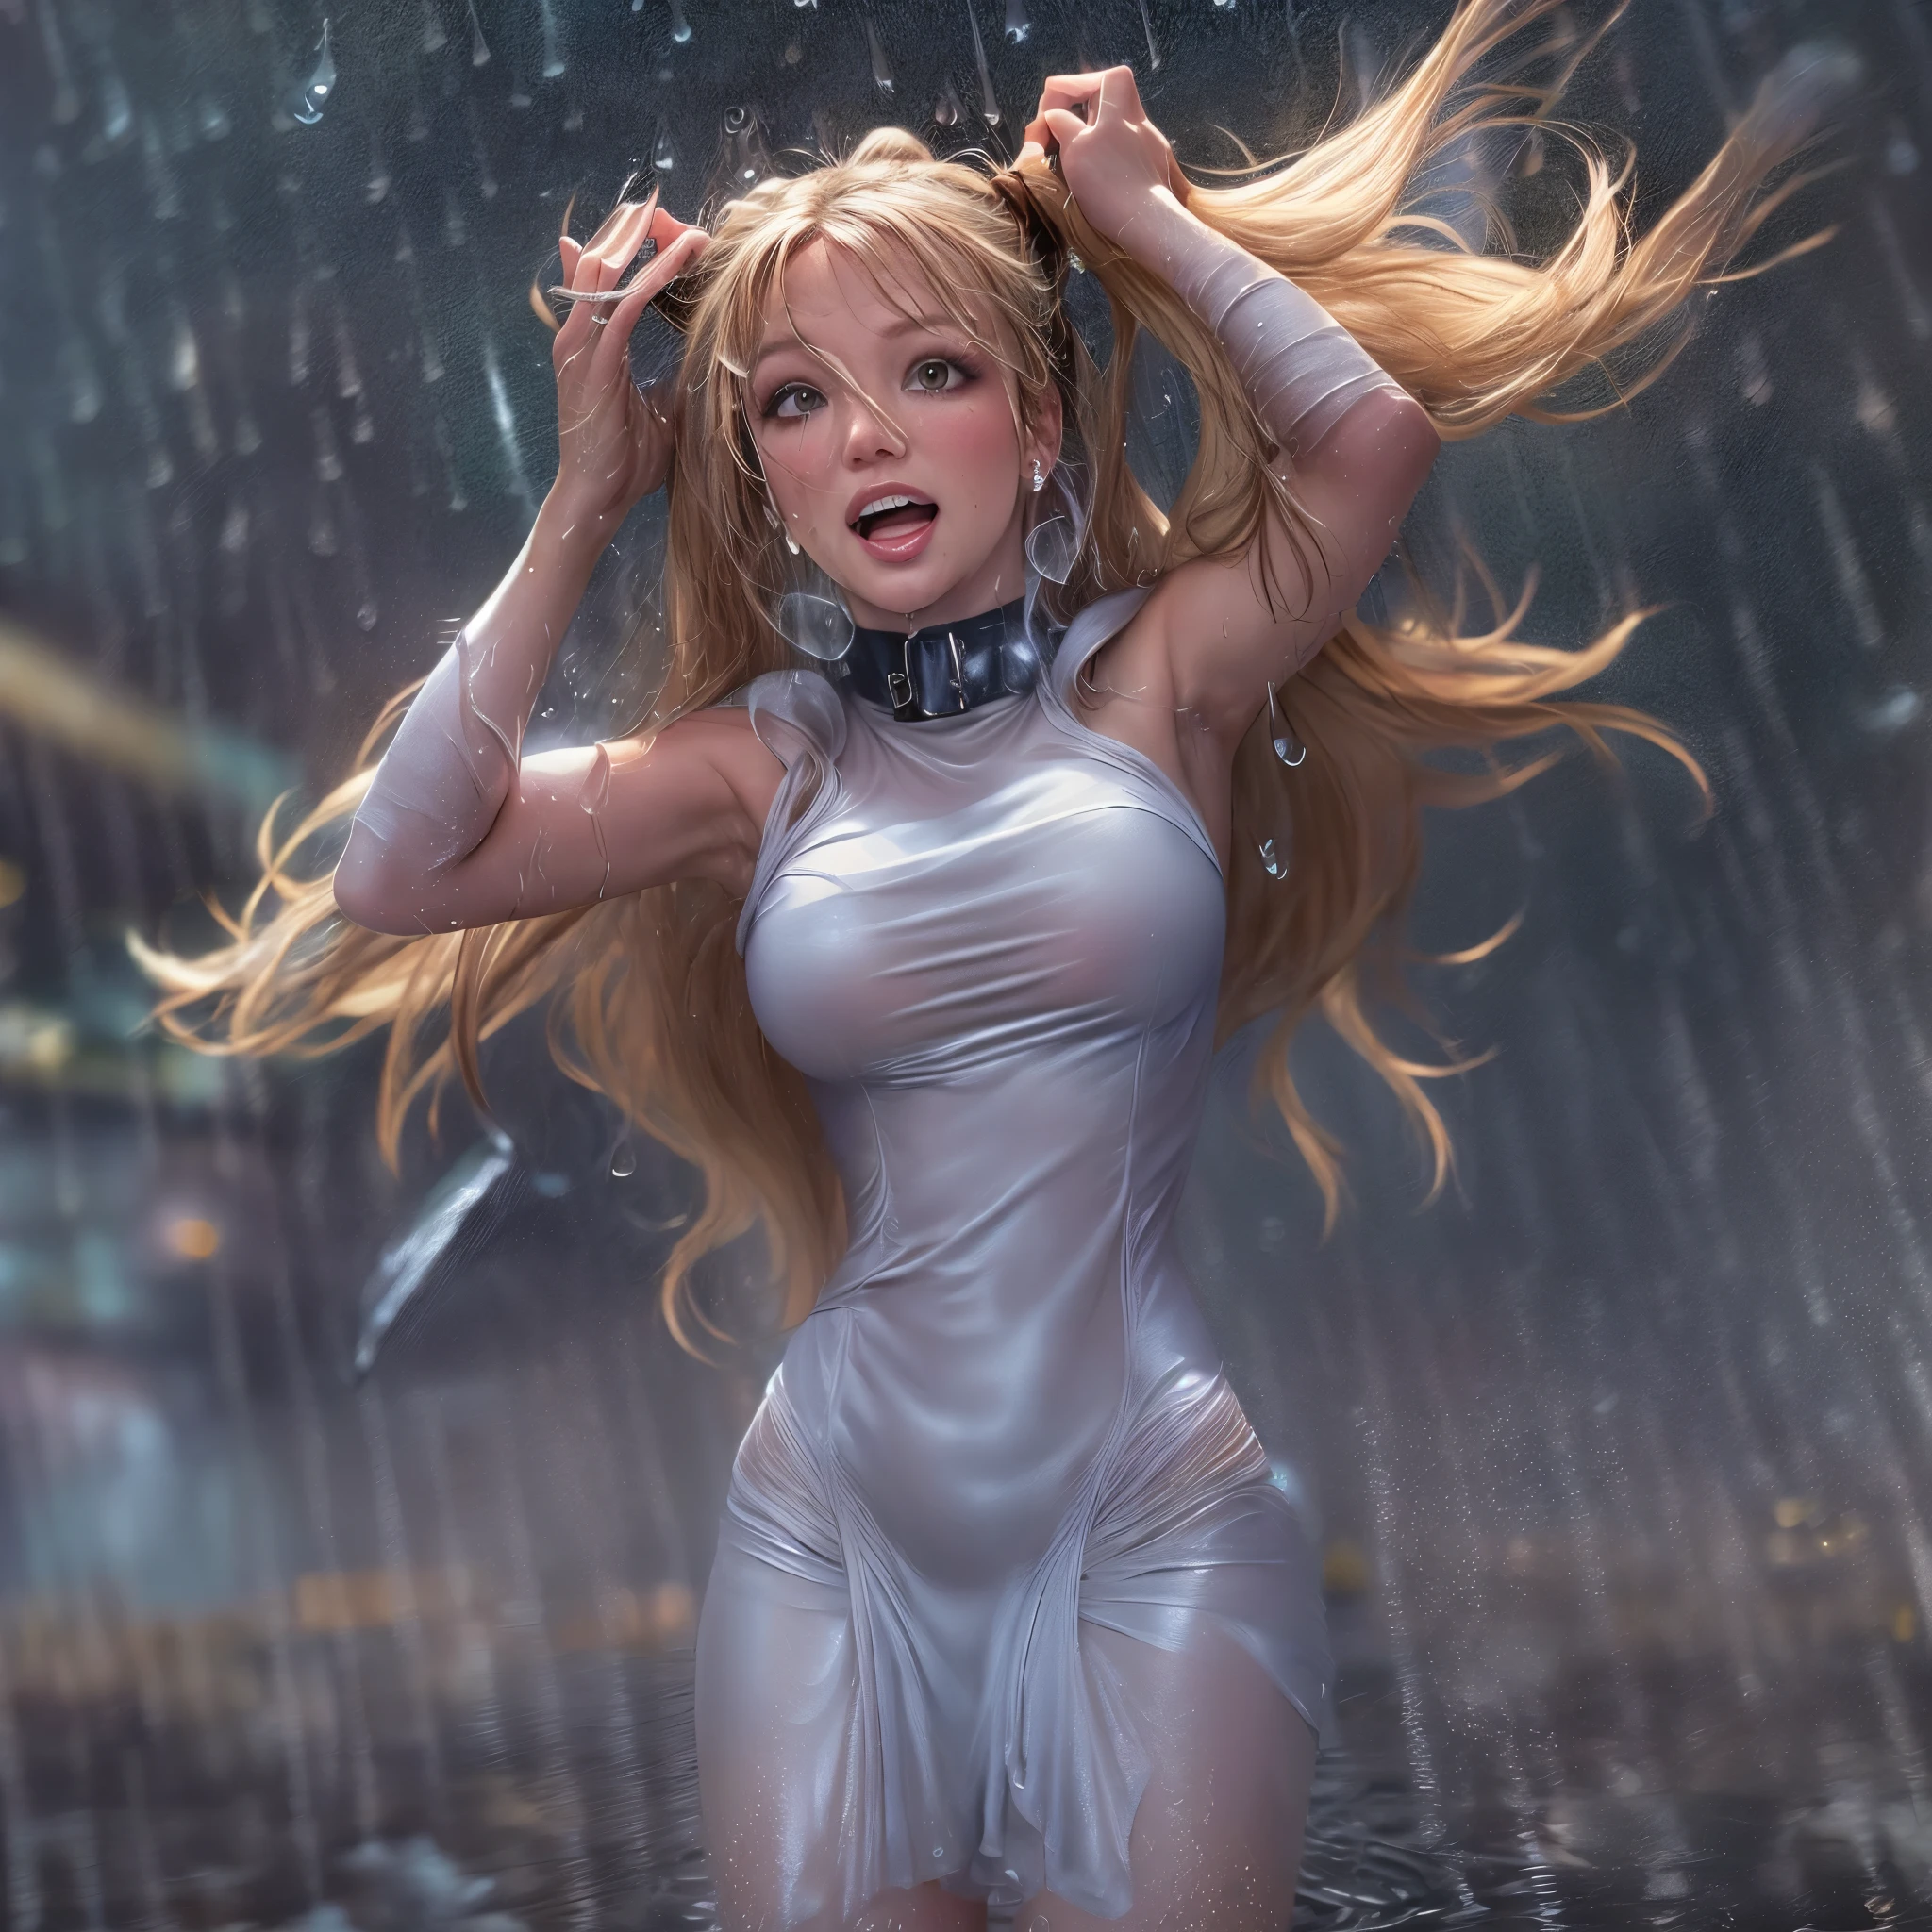 masterpiece of ExtremelyDetailed (ProfessionalPhoto of Stunning women:1.4) Looking at Sky, (((Downpour))), BraidHair with bun, (Joyful Expressions LifeLike Rendering), ((Extremely detailed beautiful face and eyes)) BlushAhegao SmoothArmpit LiquidSoap WhiteBubbles (((WetHair)))  BREAK  PUNIPUNI ((Britney Spears))britneyspears-smf, Beltbra, MysticSight, (Torrential Rain:1.4) (SparklingDrops:1.28) (Overflowing HUGE Underboob Overflowing WaterDrops Overflowing water)(((WetHair WetFace WetSkin:1.37))), (SFW), HiddenHands, MotionBlur (BokeH:1.4), (no extra limbs), (no extra eyebrow), DynamicAngle